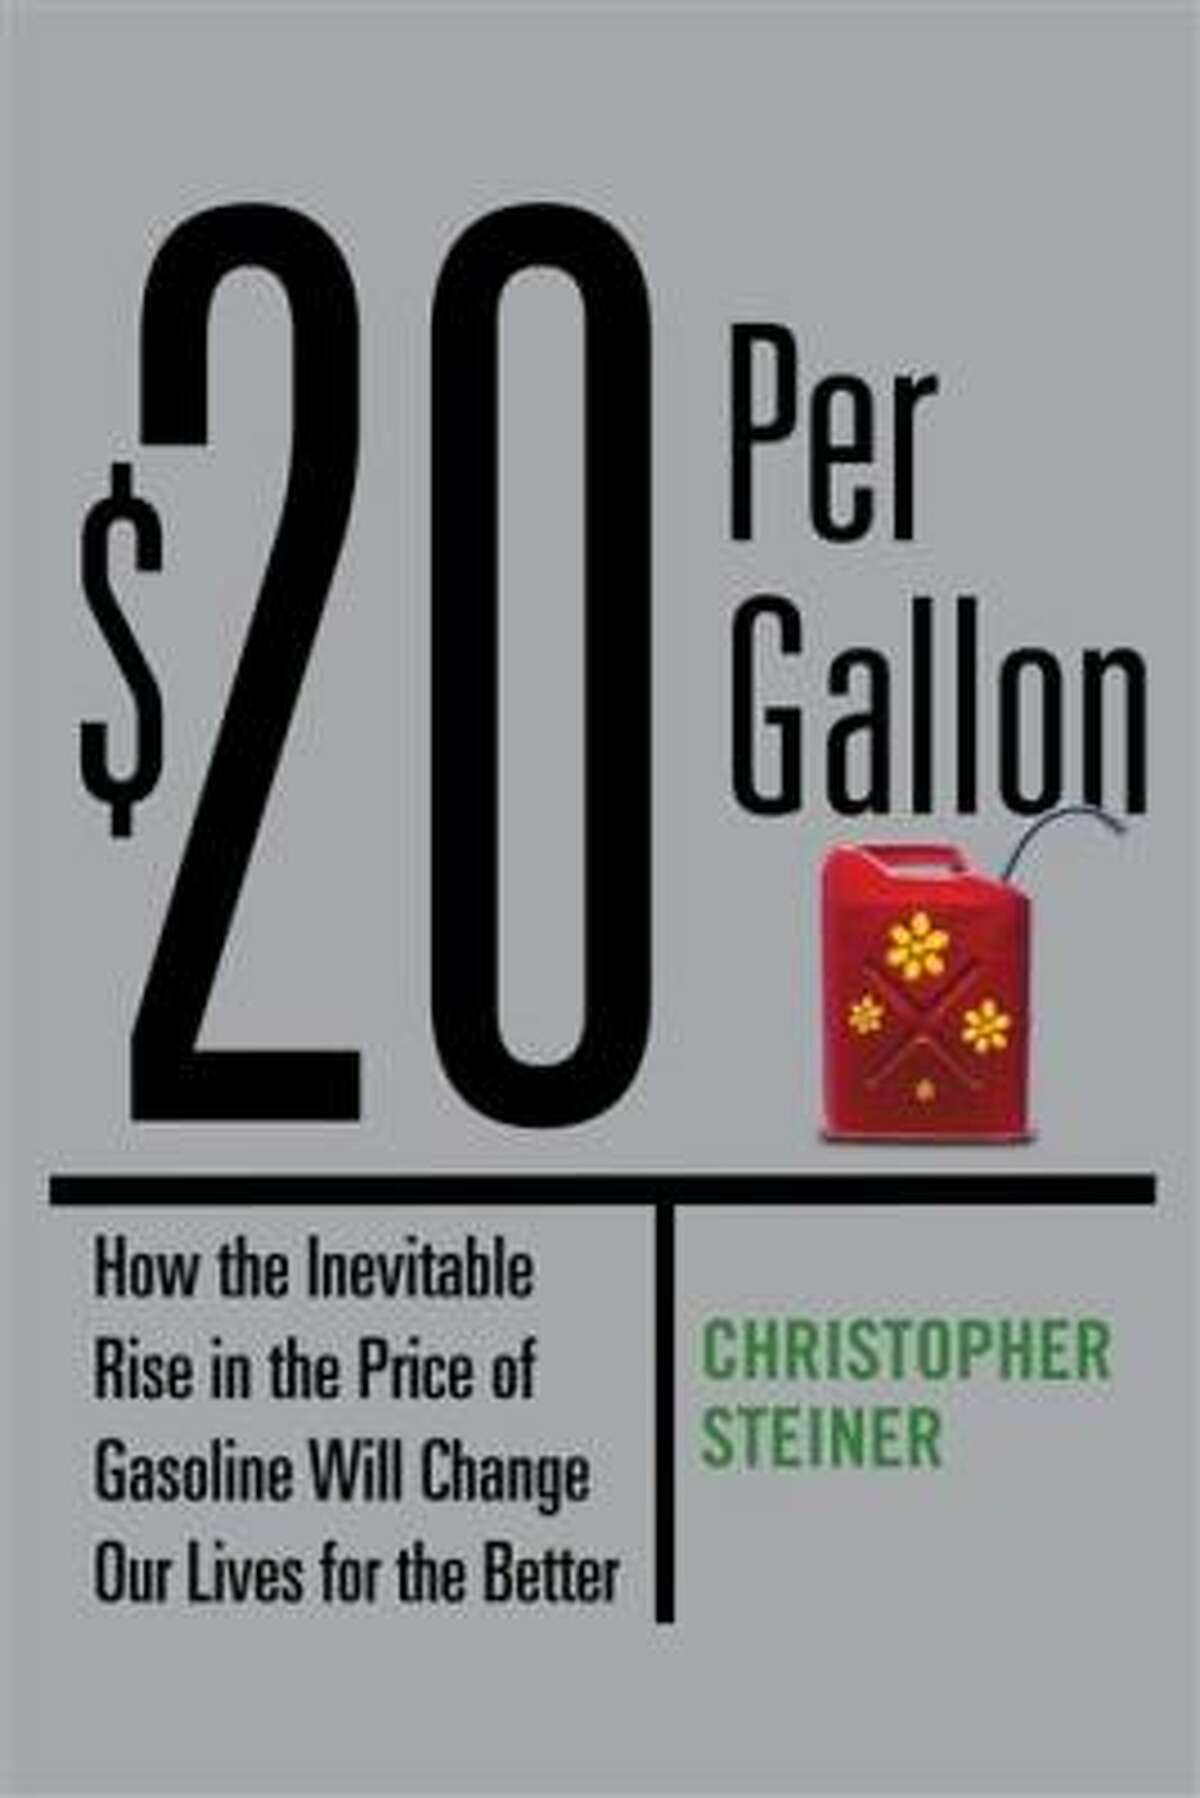 In his book, Christopher Steiner argues that airlines will stop flying when gas hits $8 a gallon.